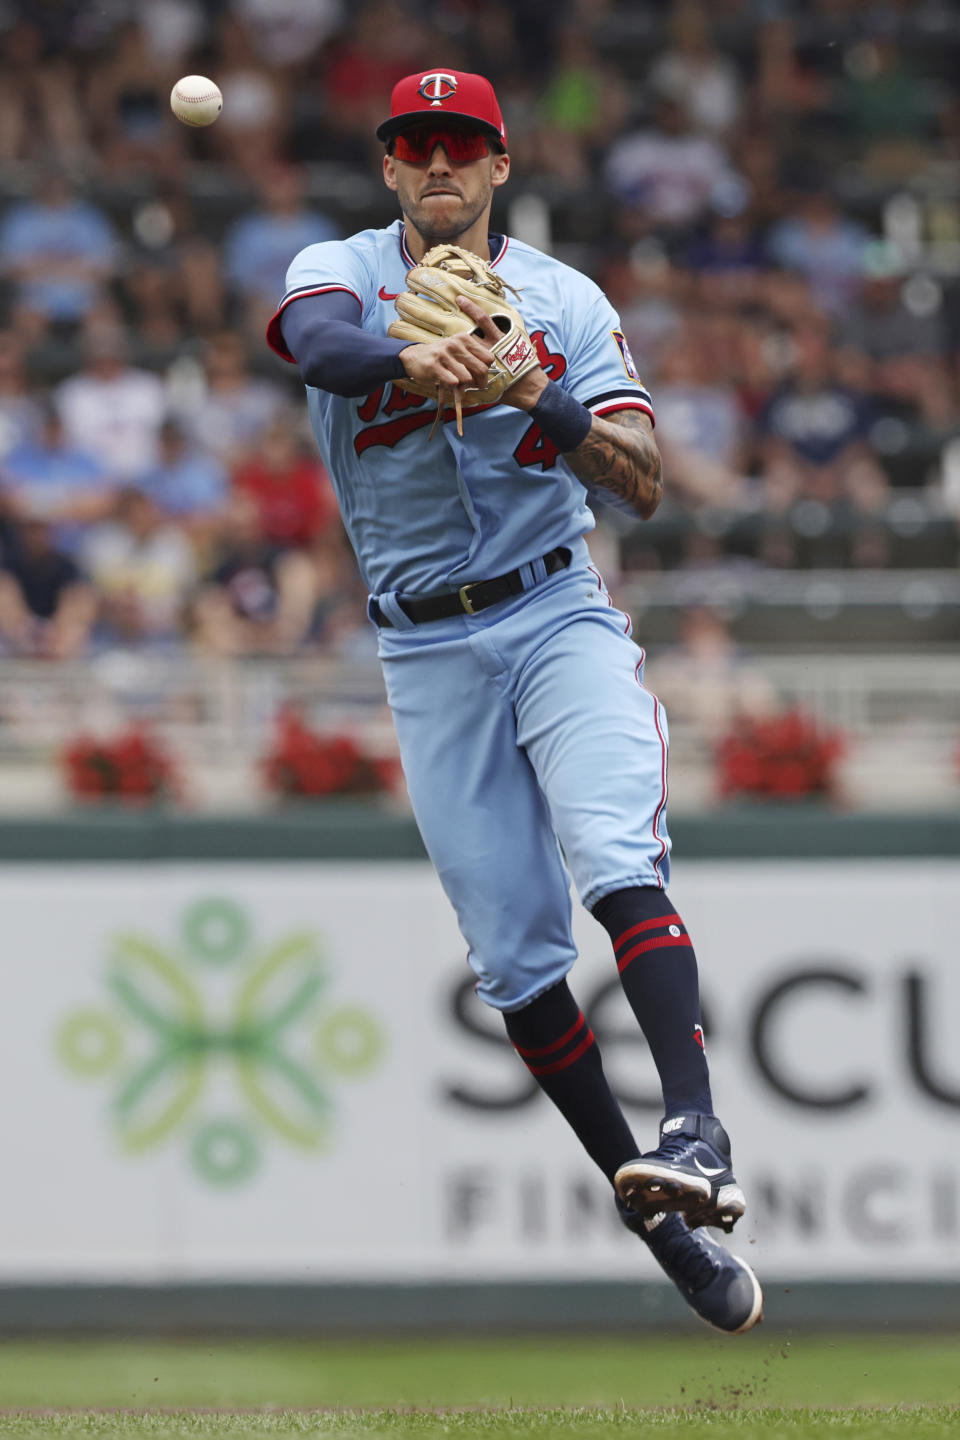 Minnesota Twins shortstop Carlos Correa throws the ball to first baseman Jose Miranda for an out after Tampa Bay Rays' Ji-Man Choi hit a ground ball during the first inning of a baseball game Sunday, June 12, 2022, in Minneapolis. (AP Photo/Stacy Bengs)